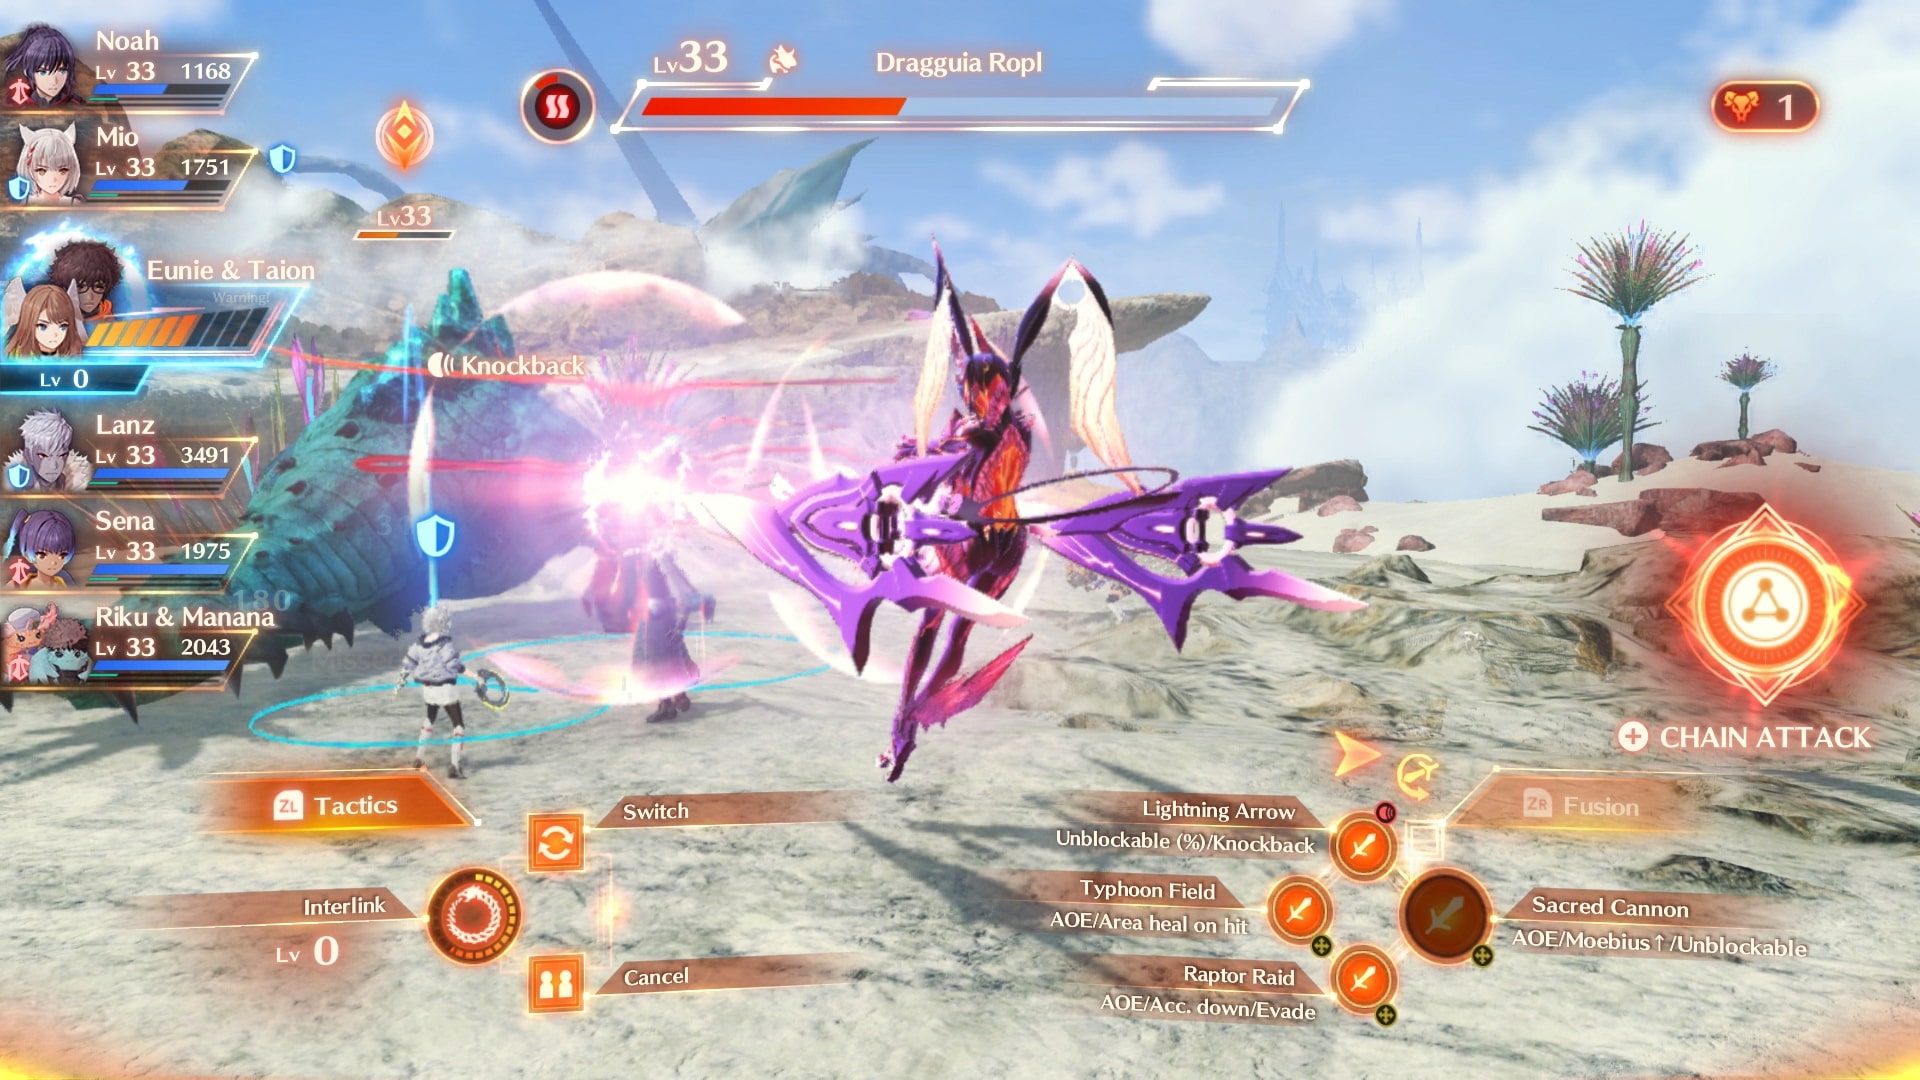 Review: Xenoblade Chronicles 3 (Nintendo Switch) – Digitally Downloaded